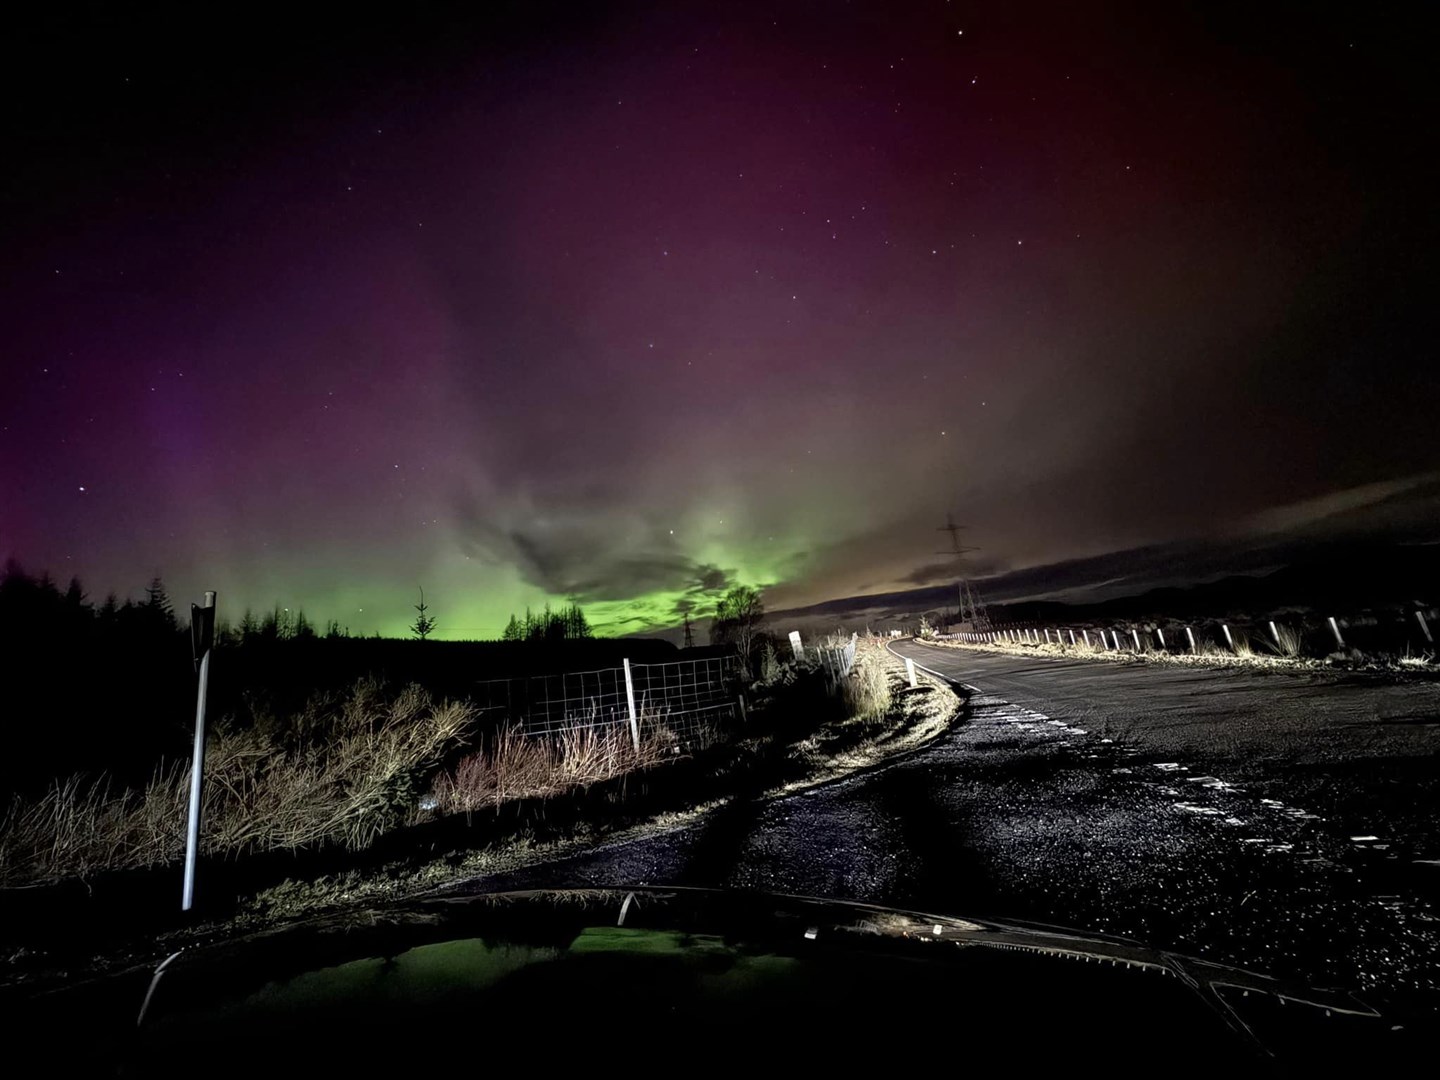 Awesome: Michael Chappell's stunning capture of the weekend's aurora borealis over Dalwhinnie.